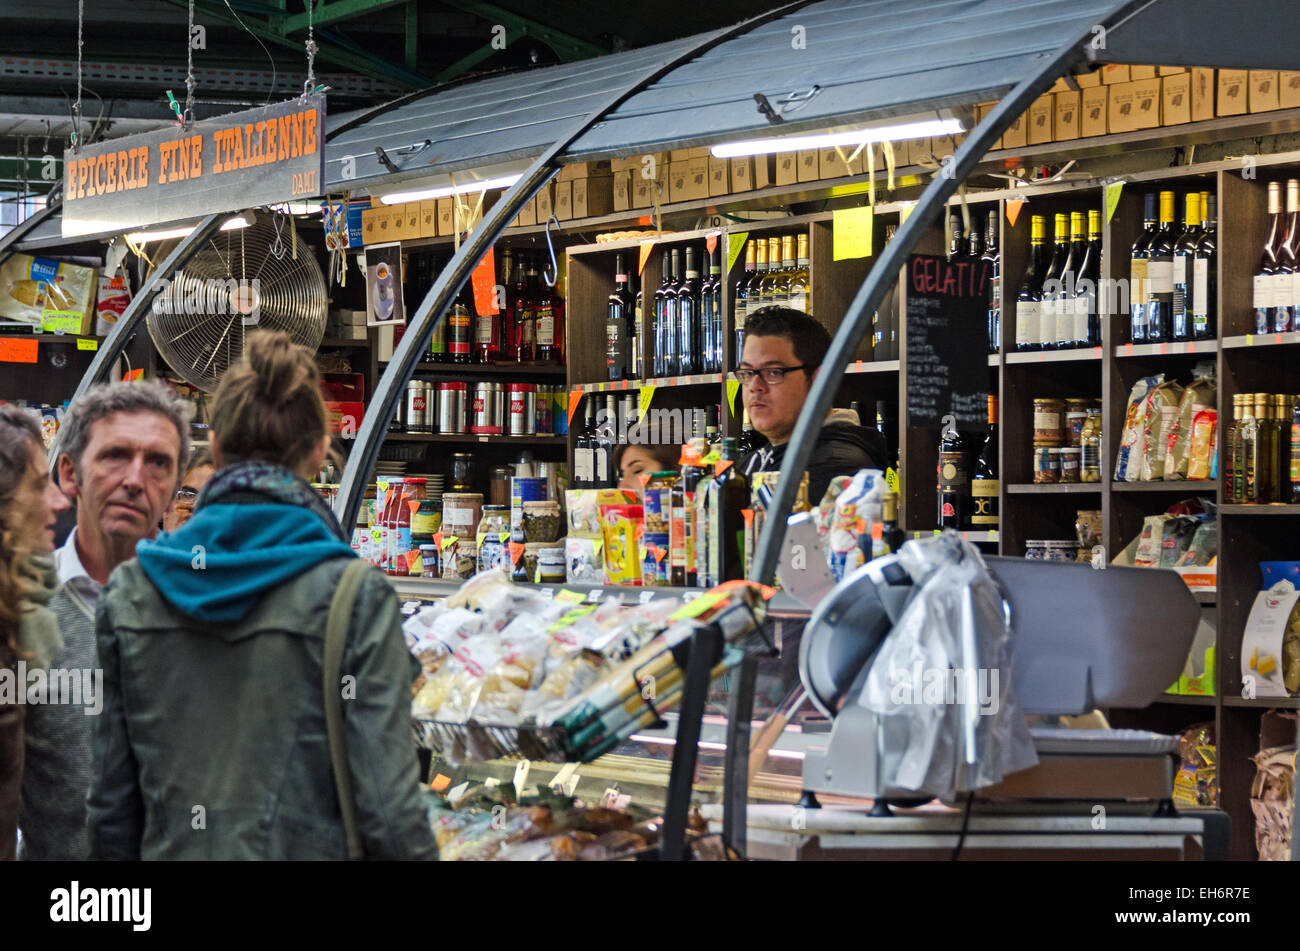 A stall selling Italian products in the Marché des Enfants Rouges, Paris. Stock Photo